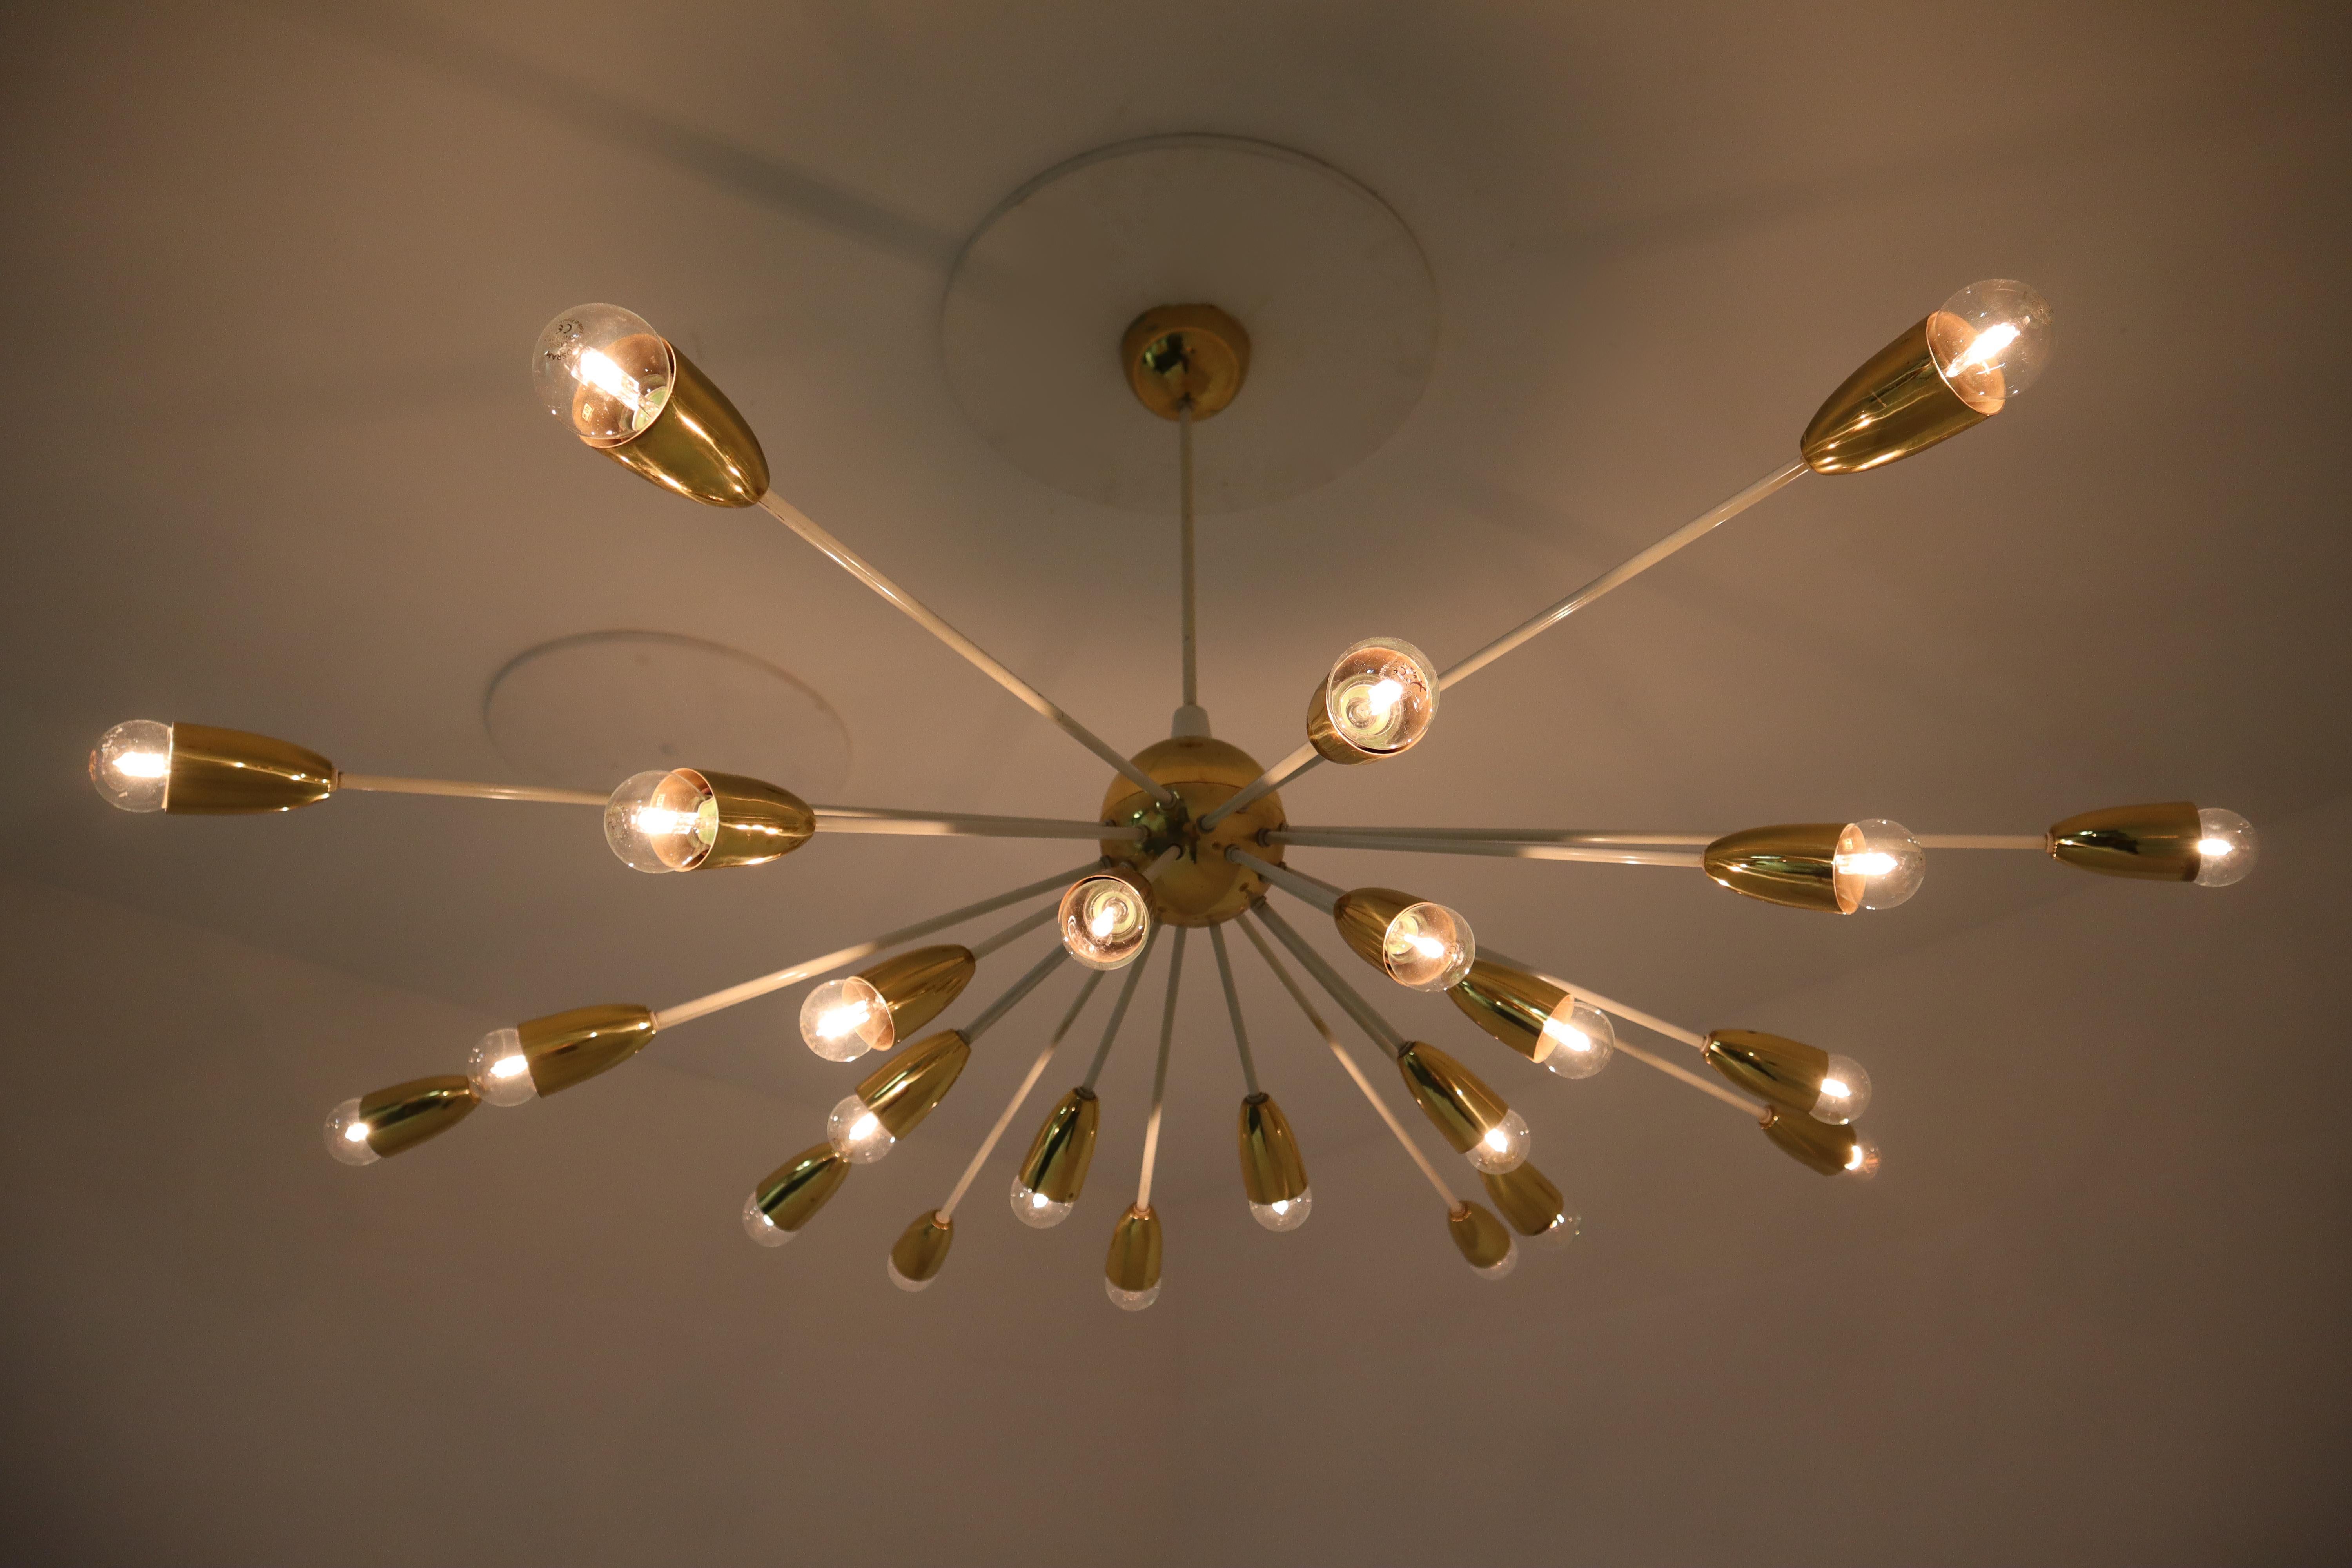 Five unique large Mid-Century Modernist Sputnik features a sculptural form design on a patinated white coated brass frame with 24 brass lights. These large chandeliers with brass frame consist of 24 lights, formed in a circle. The pleasant light